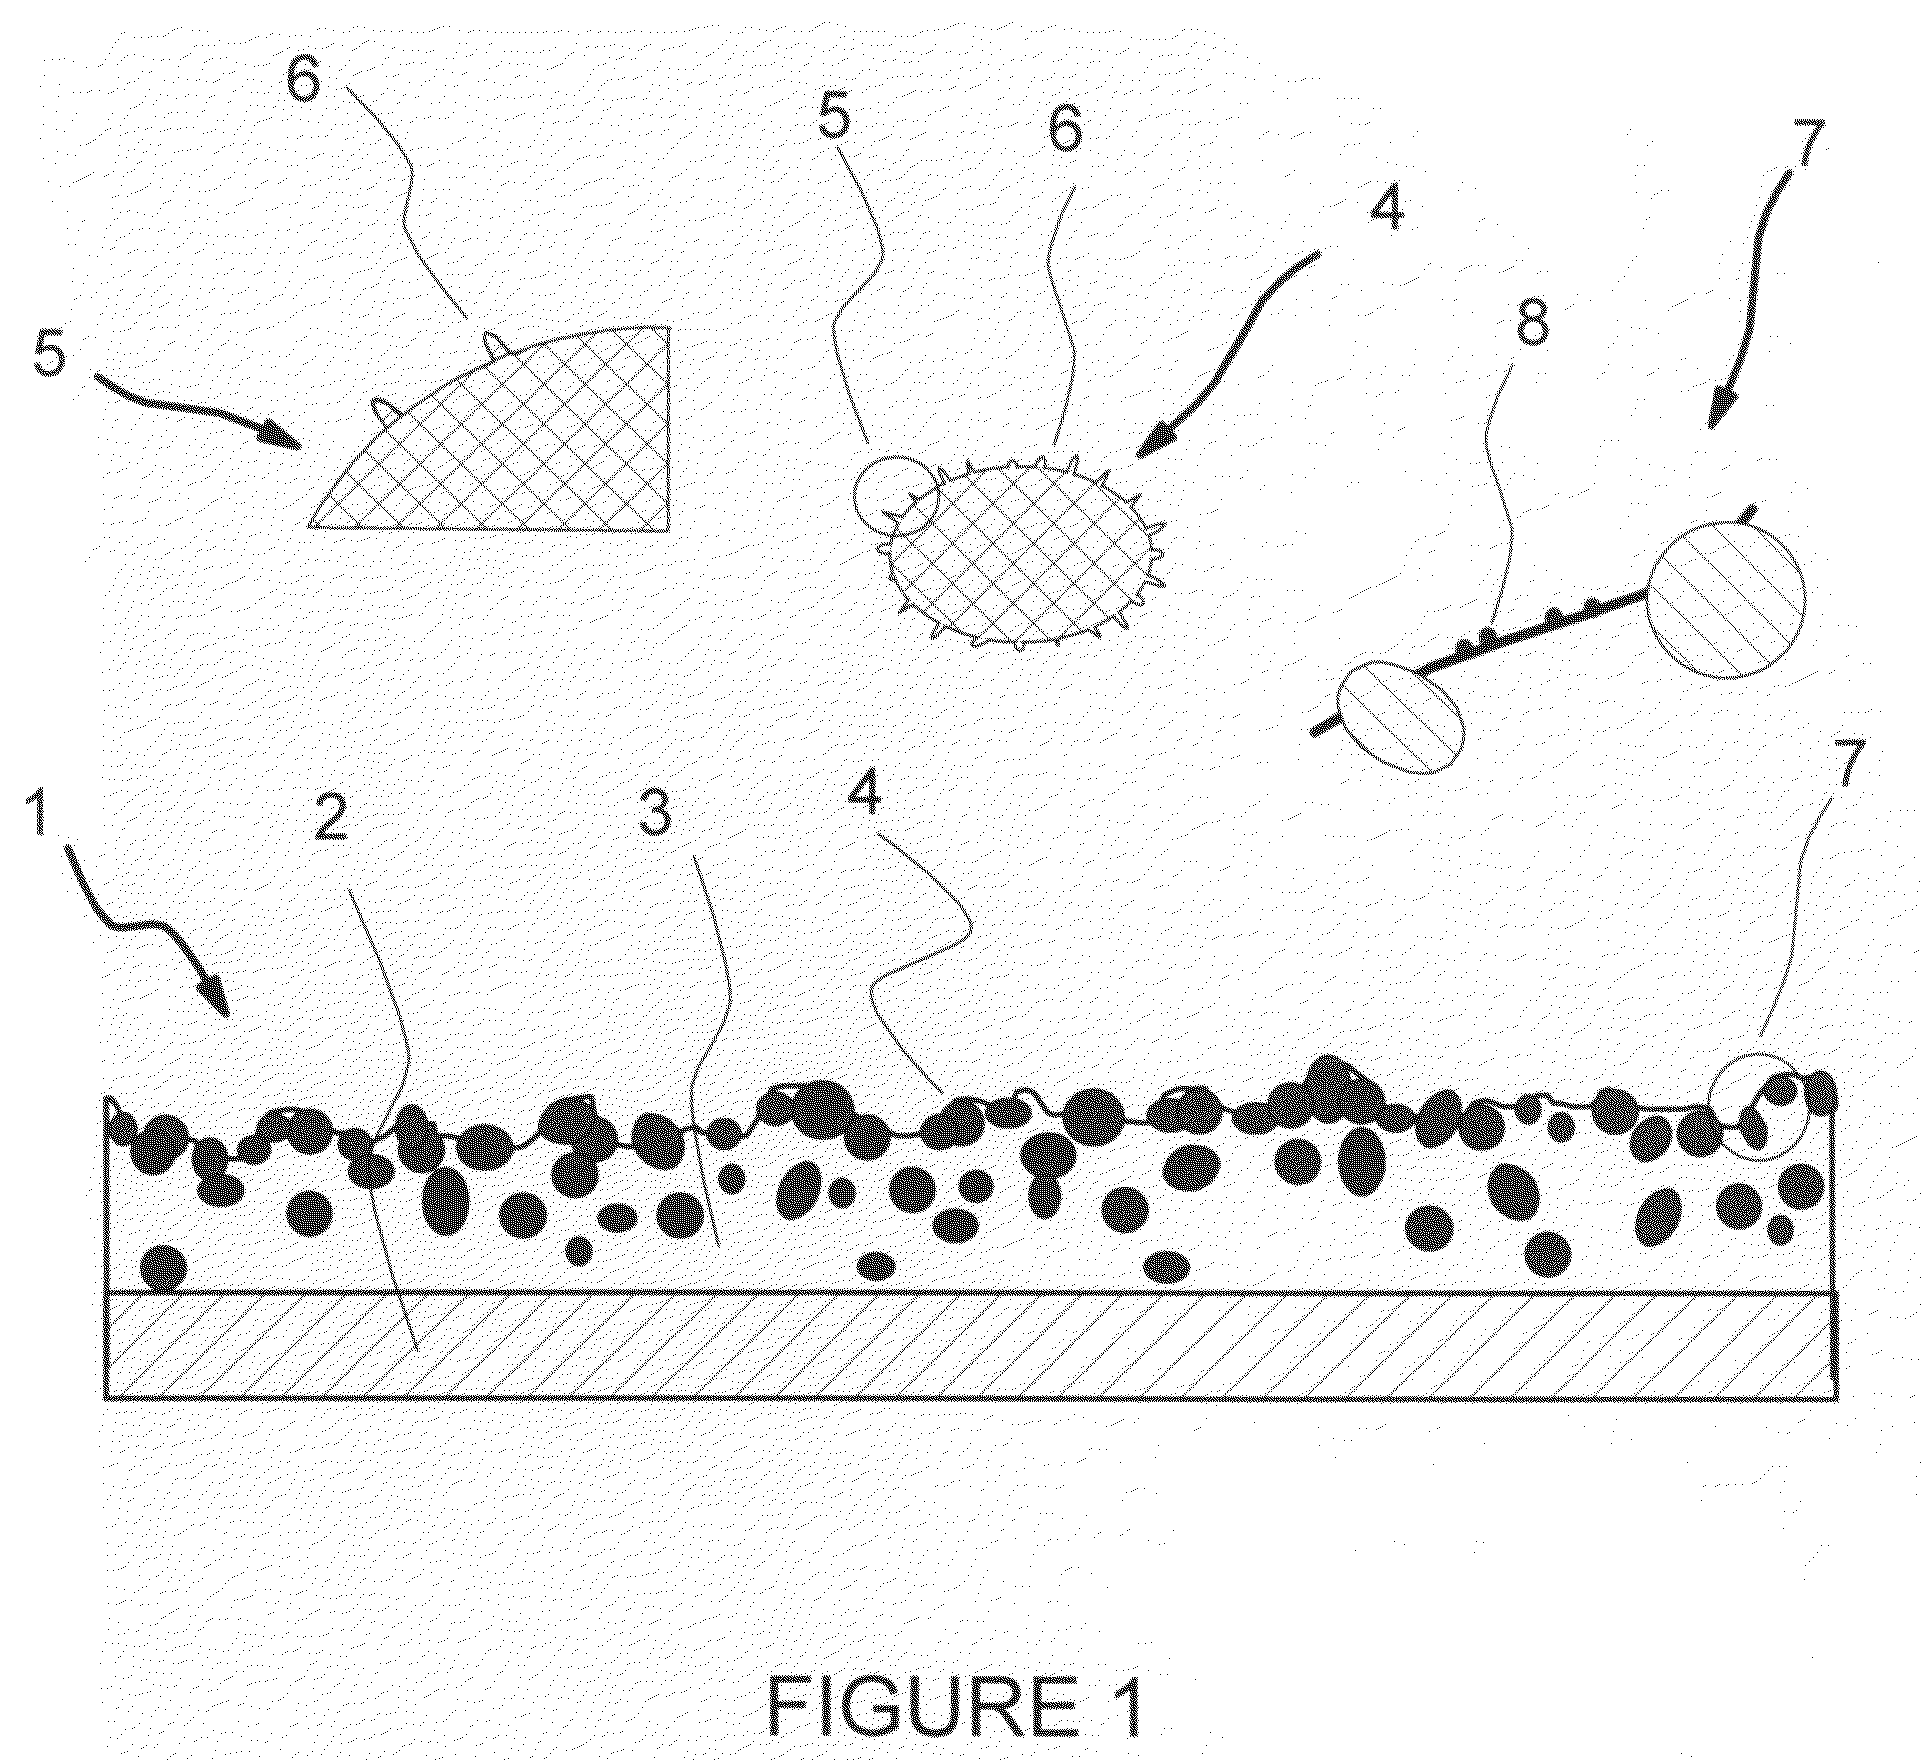 Compositions and processes for producing durable hydrophobic and/or olephobic surfaces